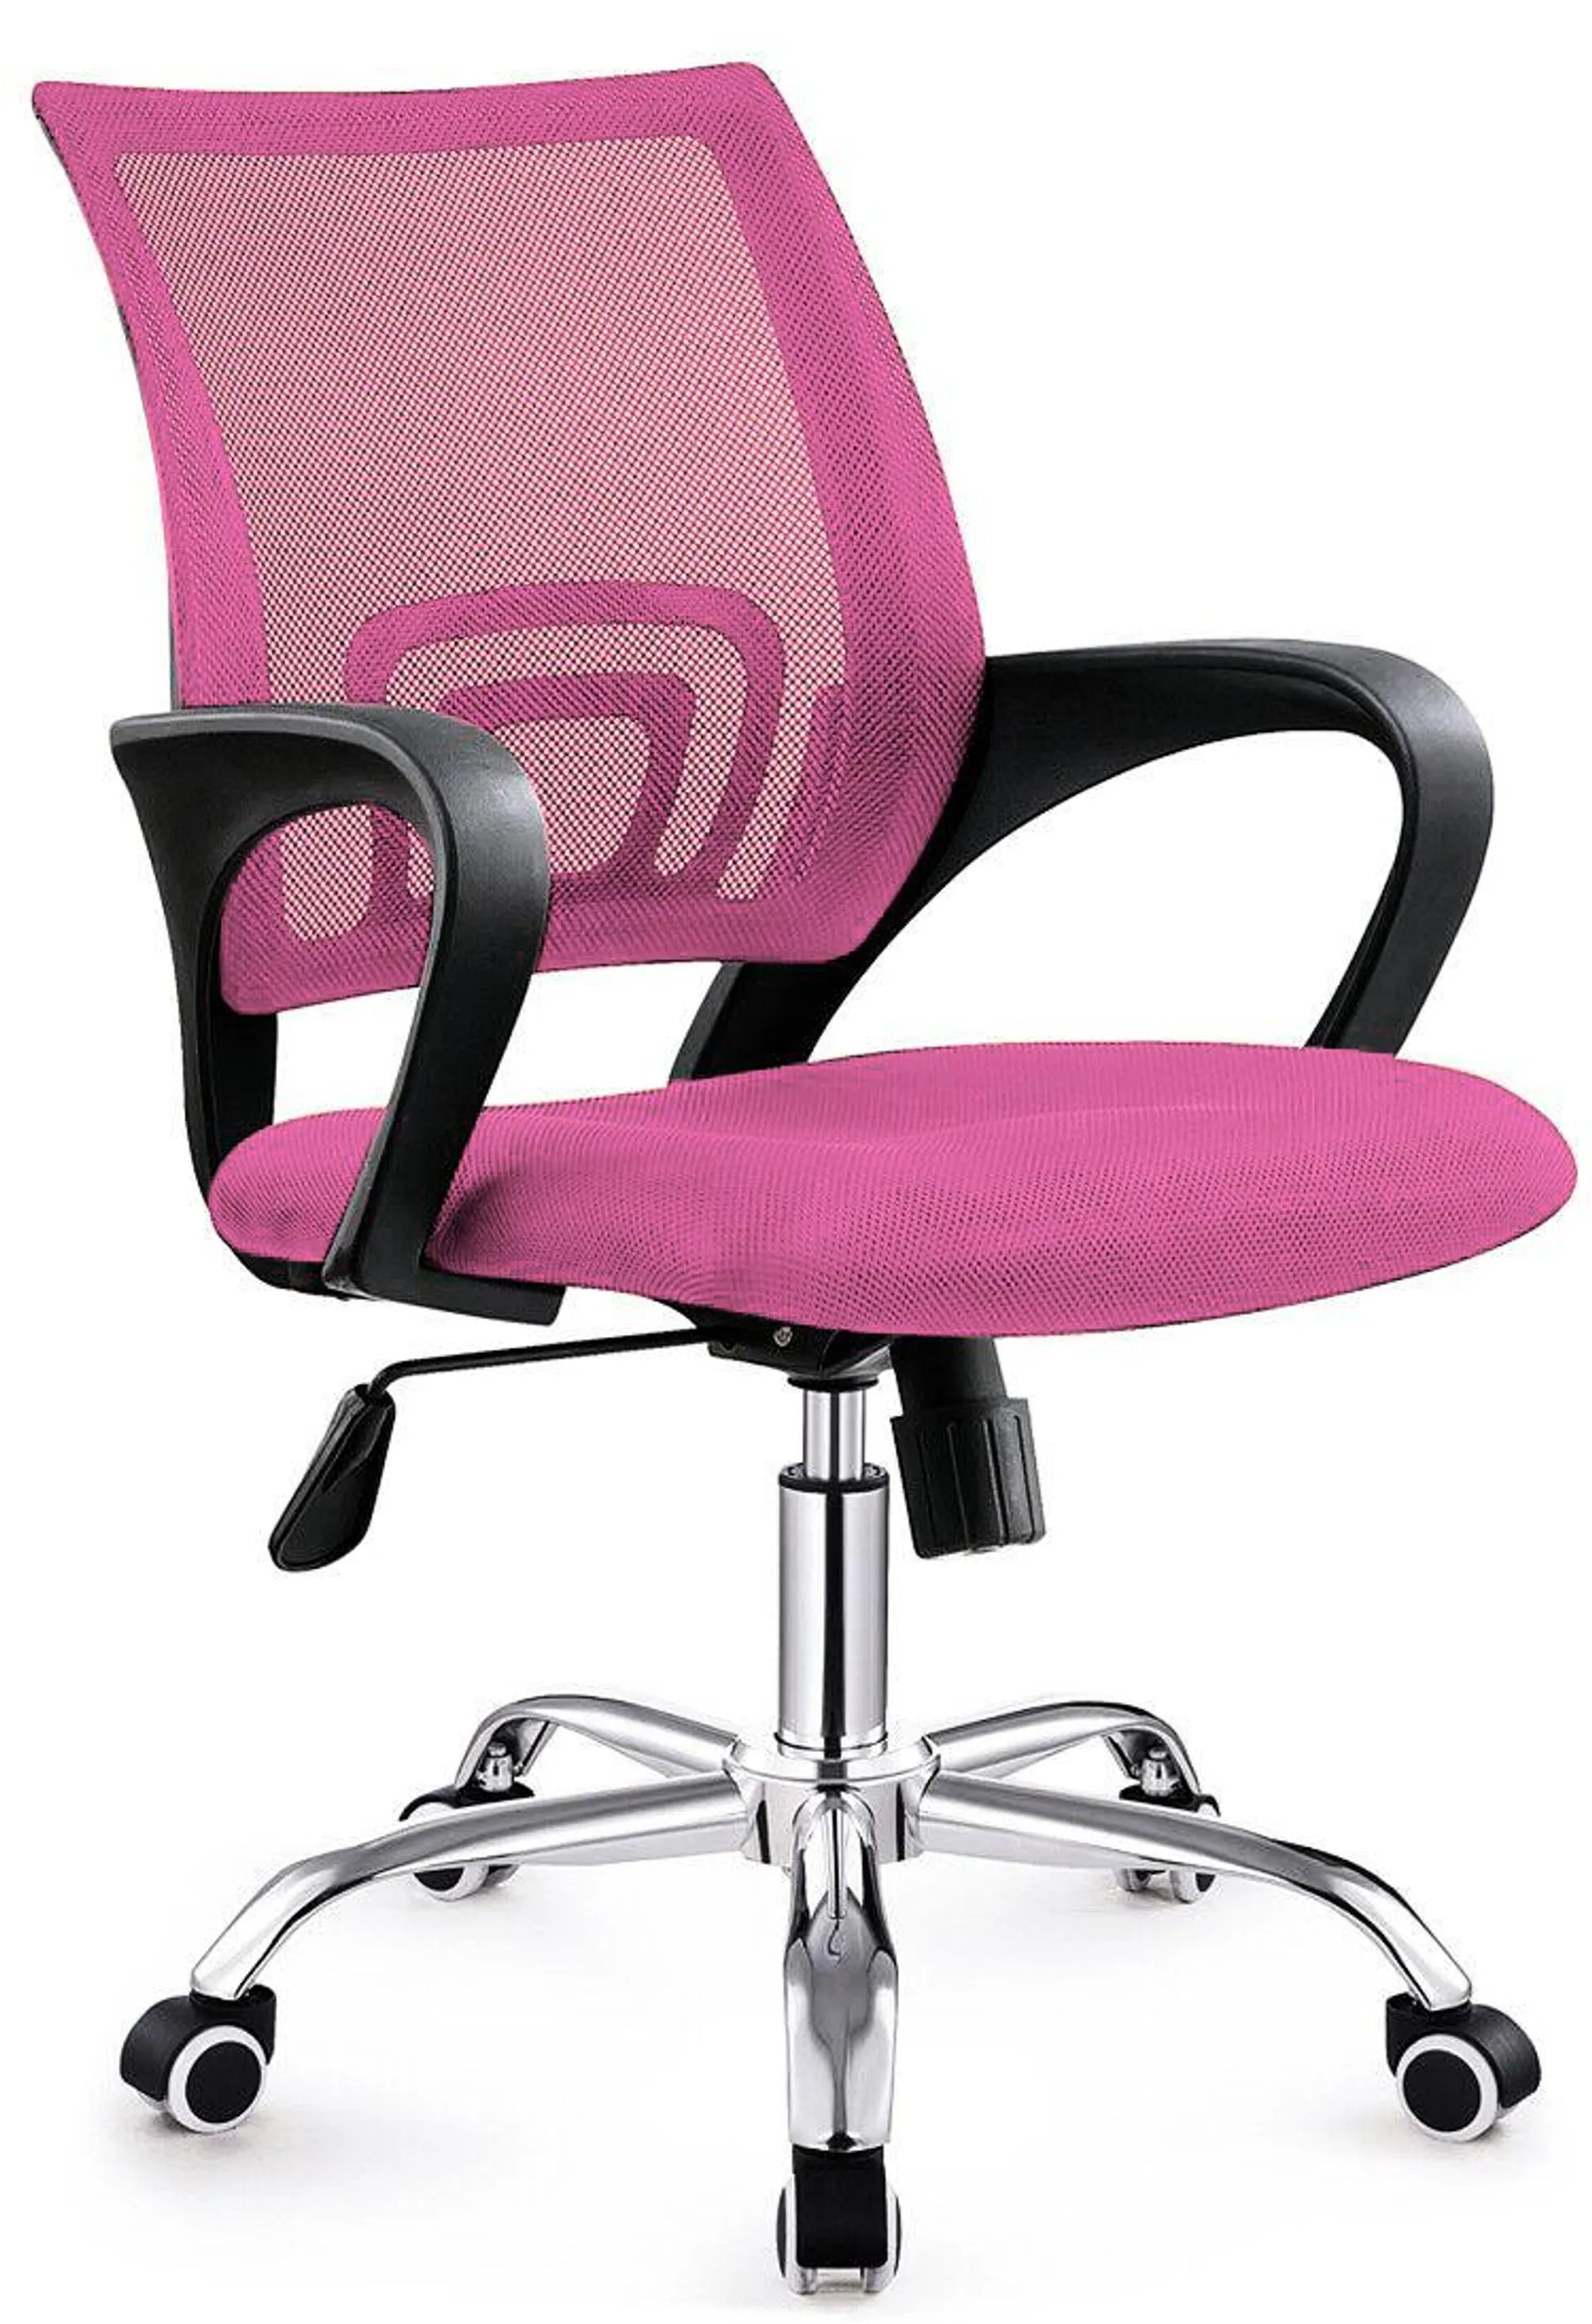 TOCC Zippy Netting Back Typist Office Chair with Chrome Base - Pink